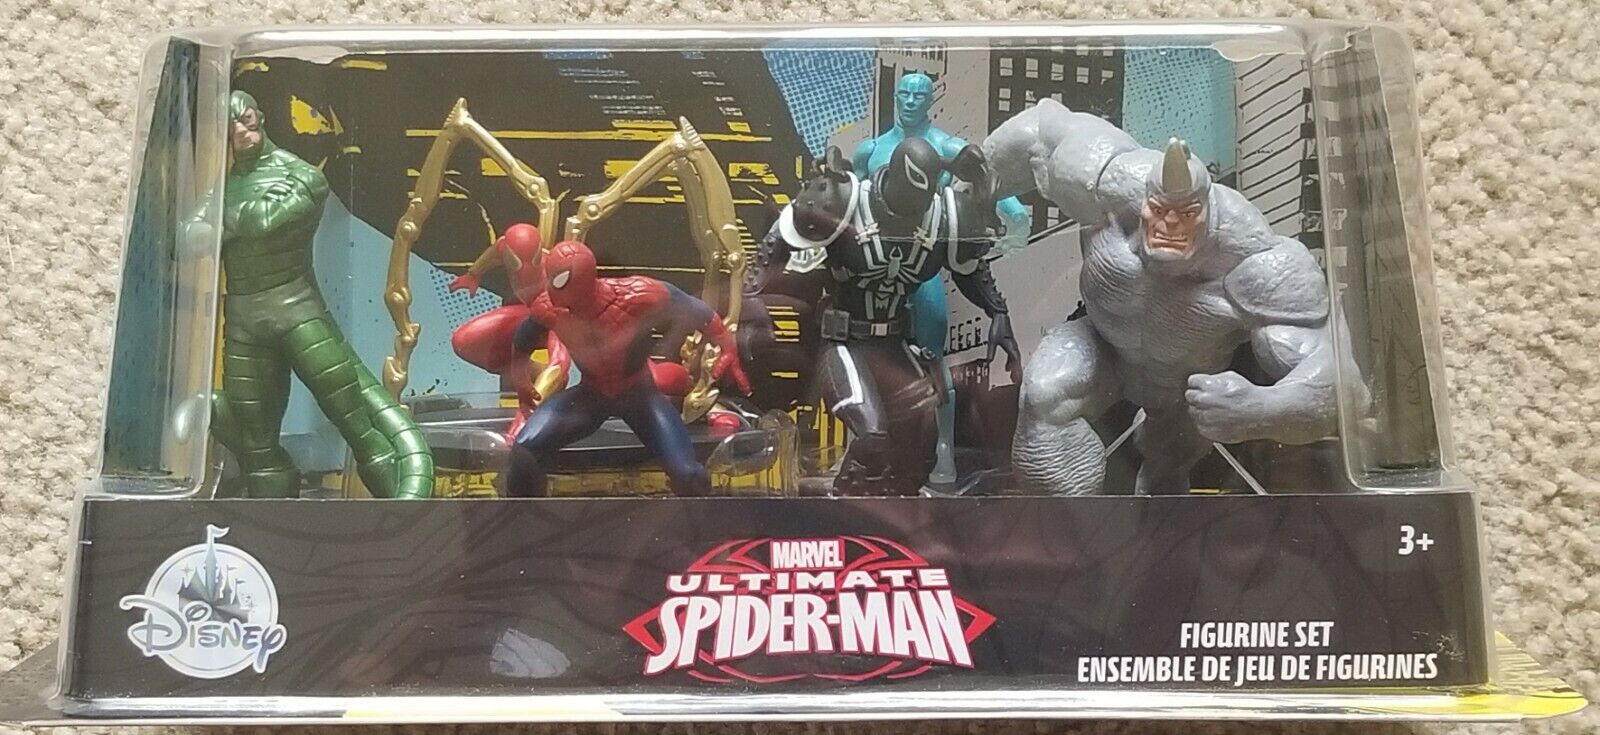 NEW Disney Store Exclusive Marvel Ultimate Spiderman Figurine SET Fast Shipping